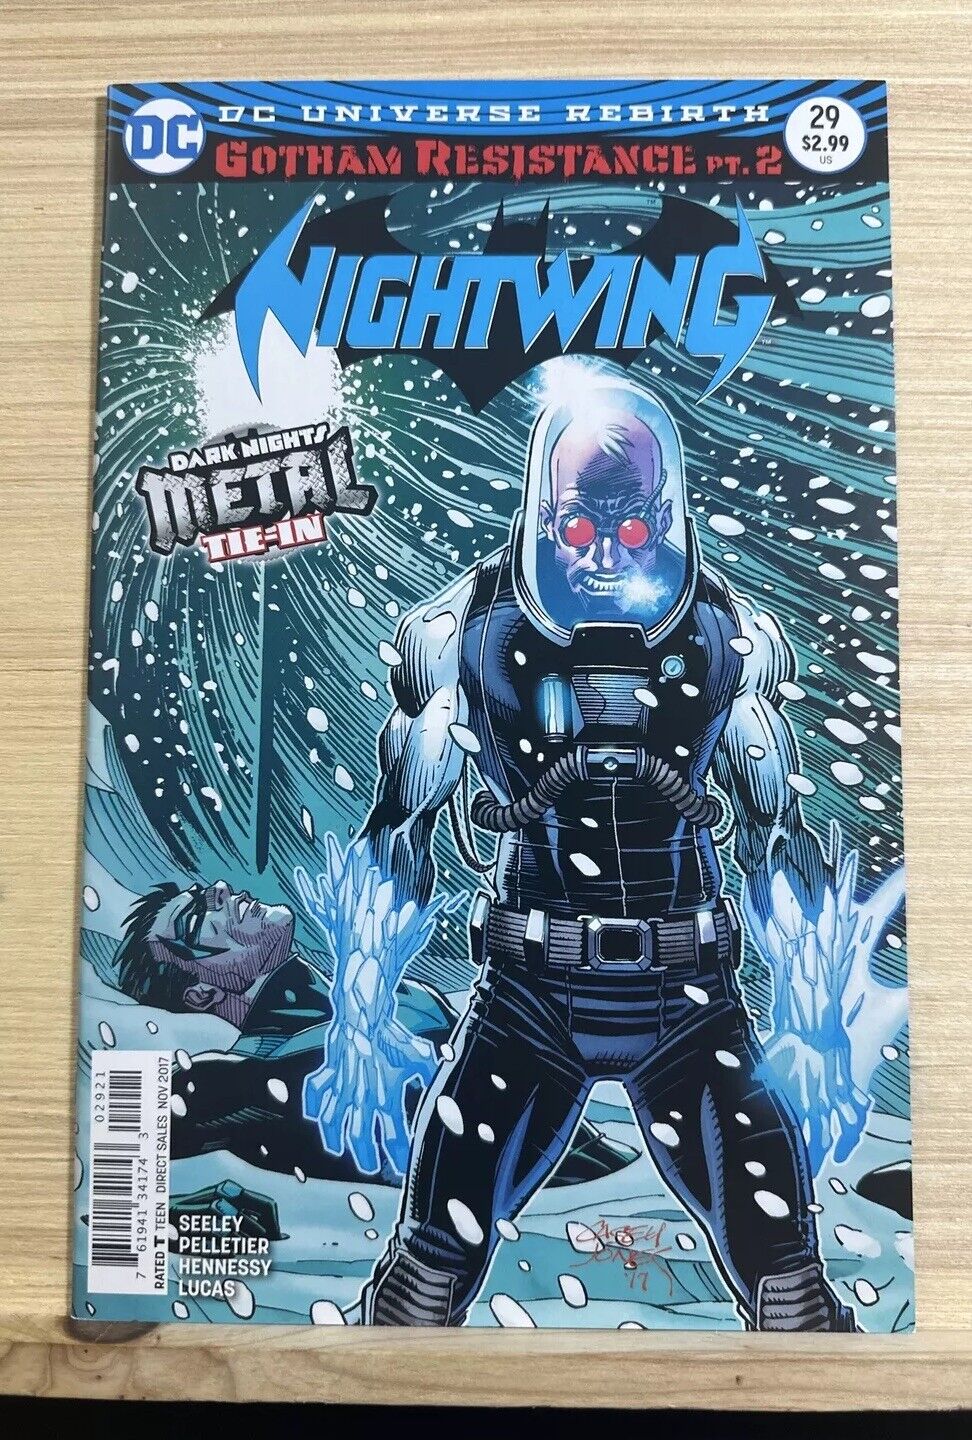 Nightwing Vol 4 (2017) Issue #29 Variant Cover